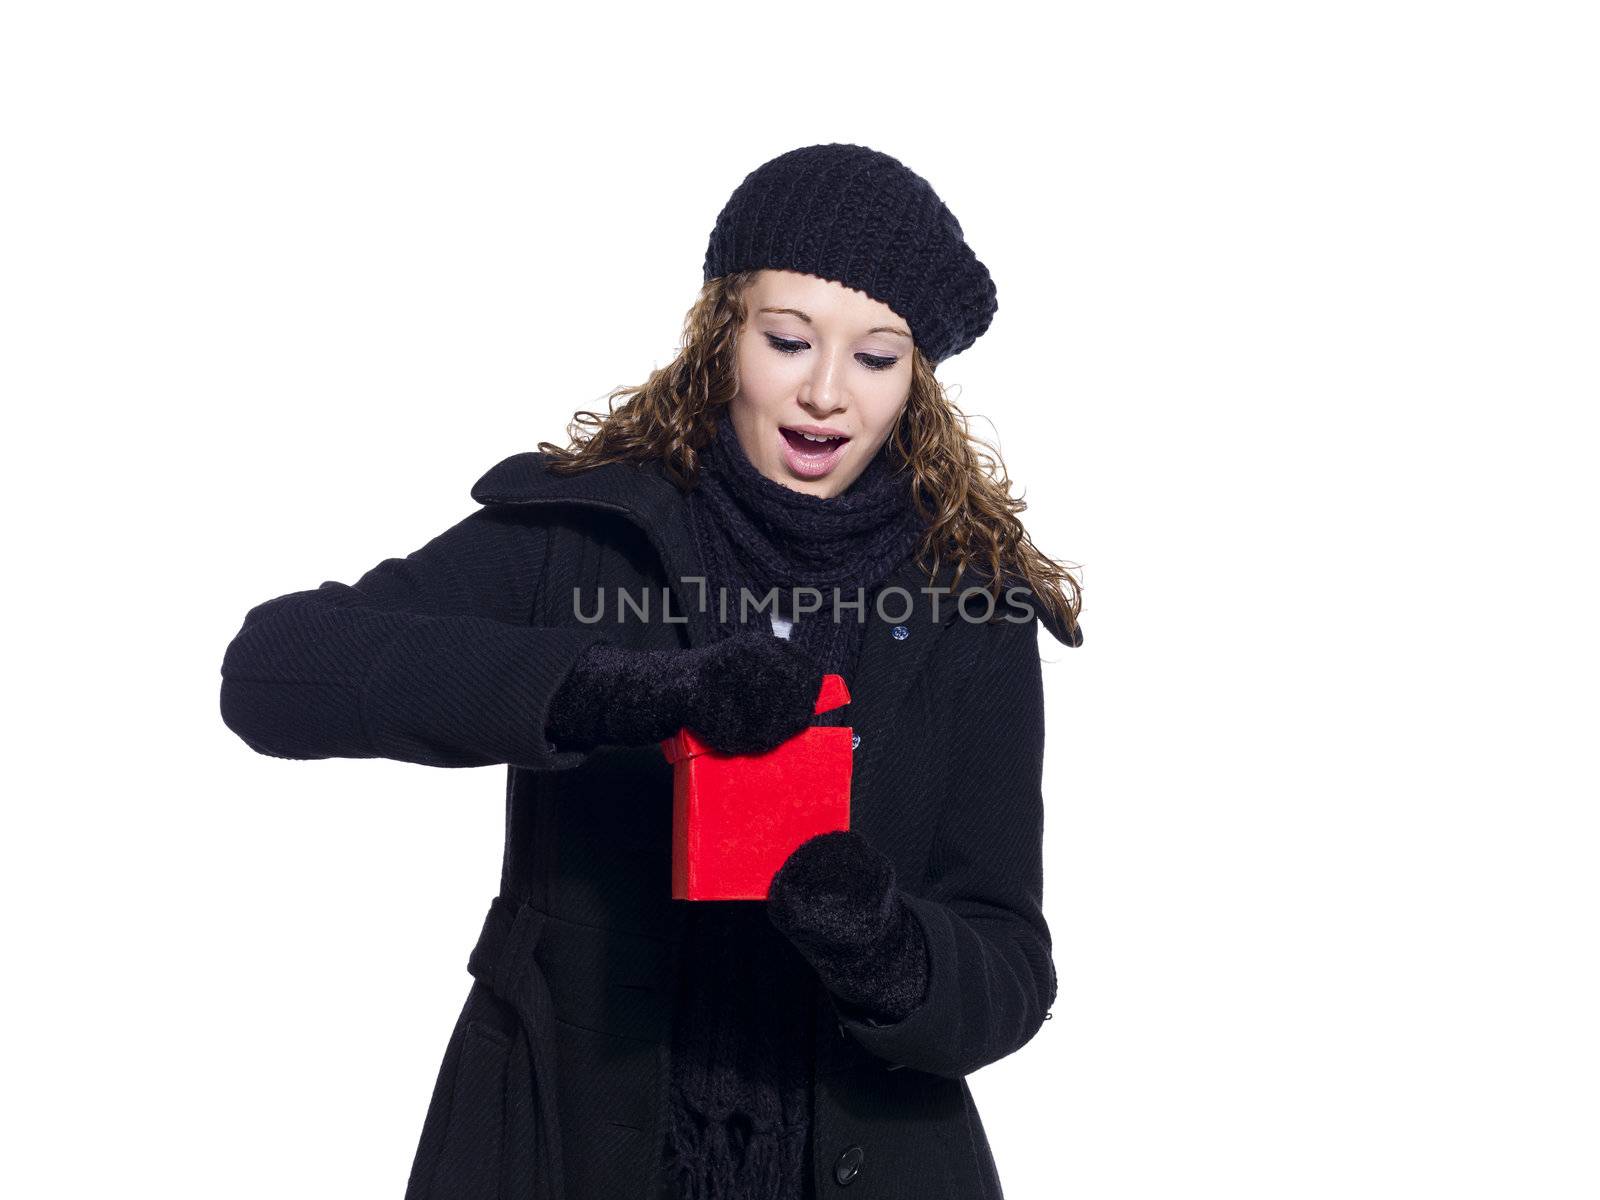 Woman in winter clothing opening her Christmas present against white background, Model: Brittany Beaudoin